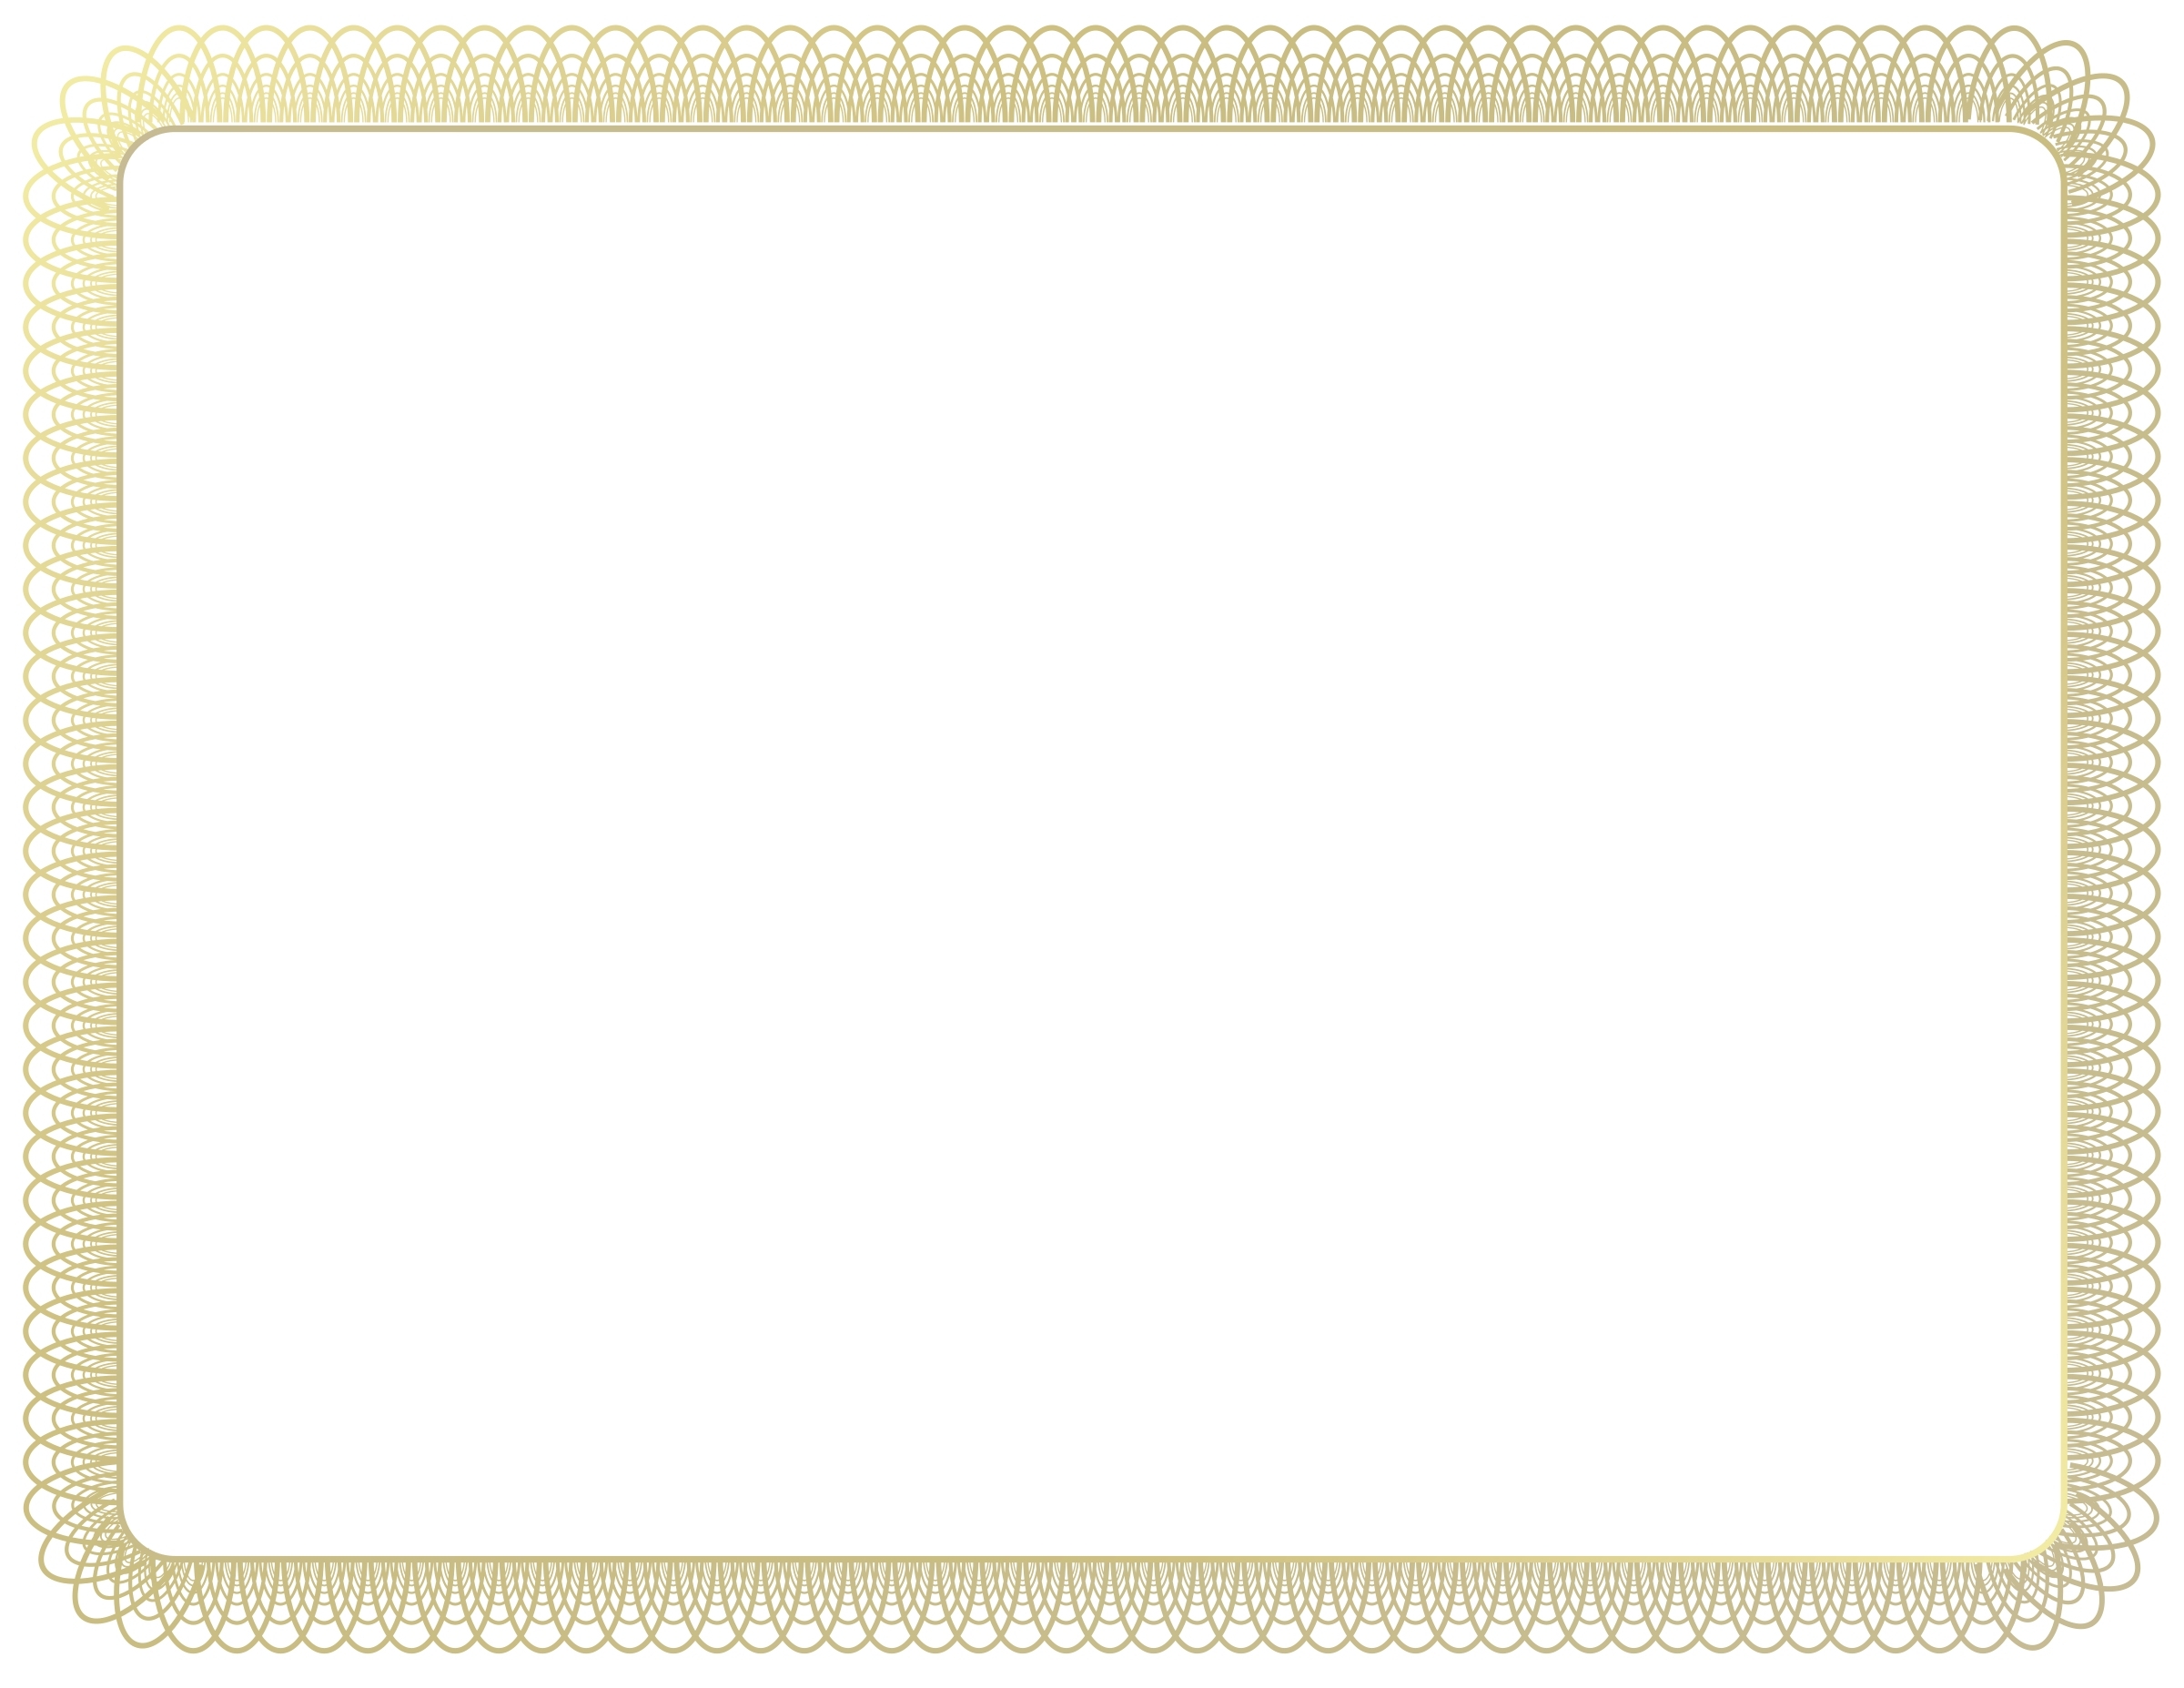 Certificate Border Png - Certificates Templates Free Pertaining To Free Printable Certificate Border Templates